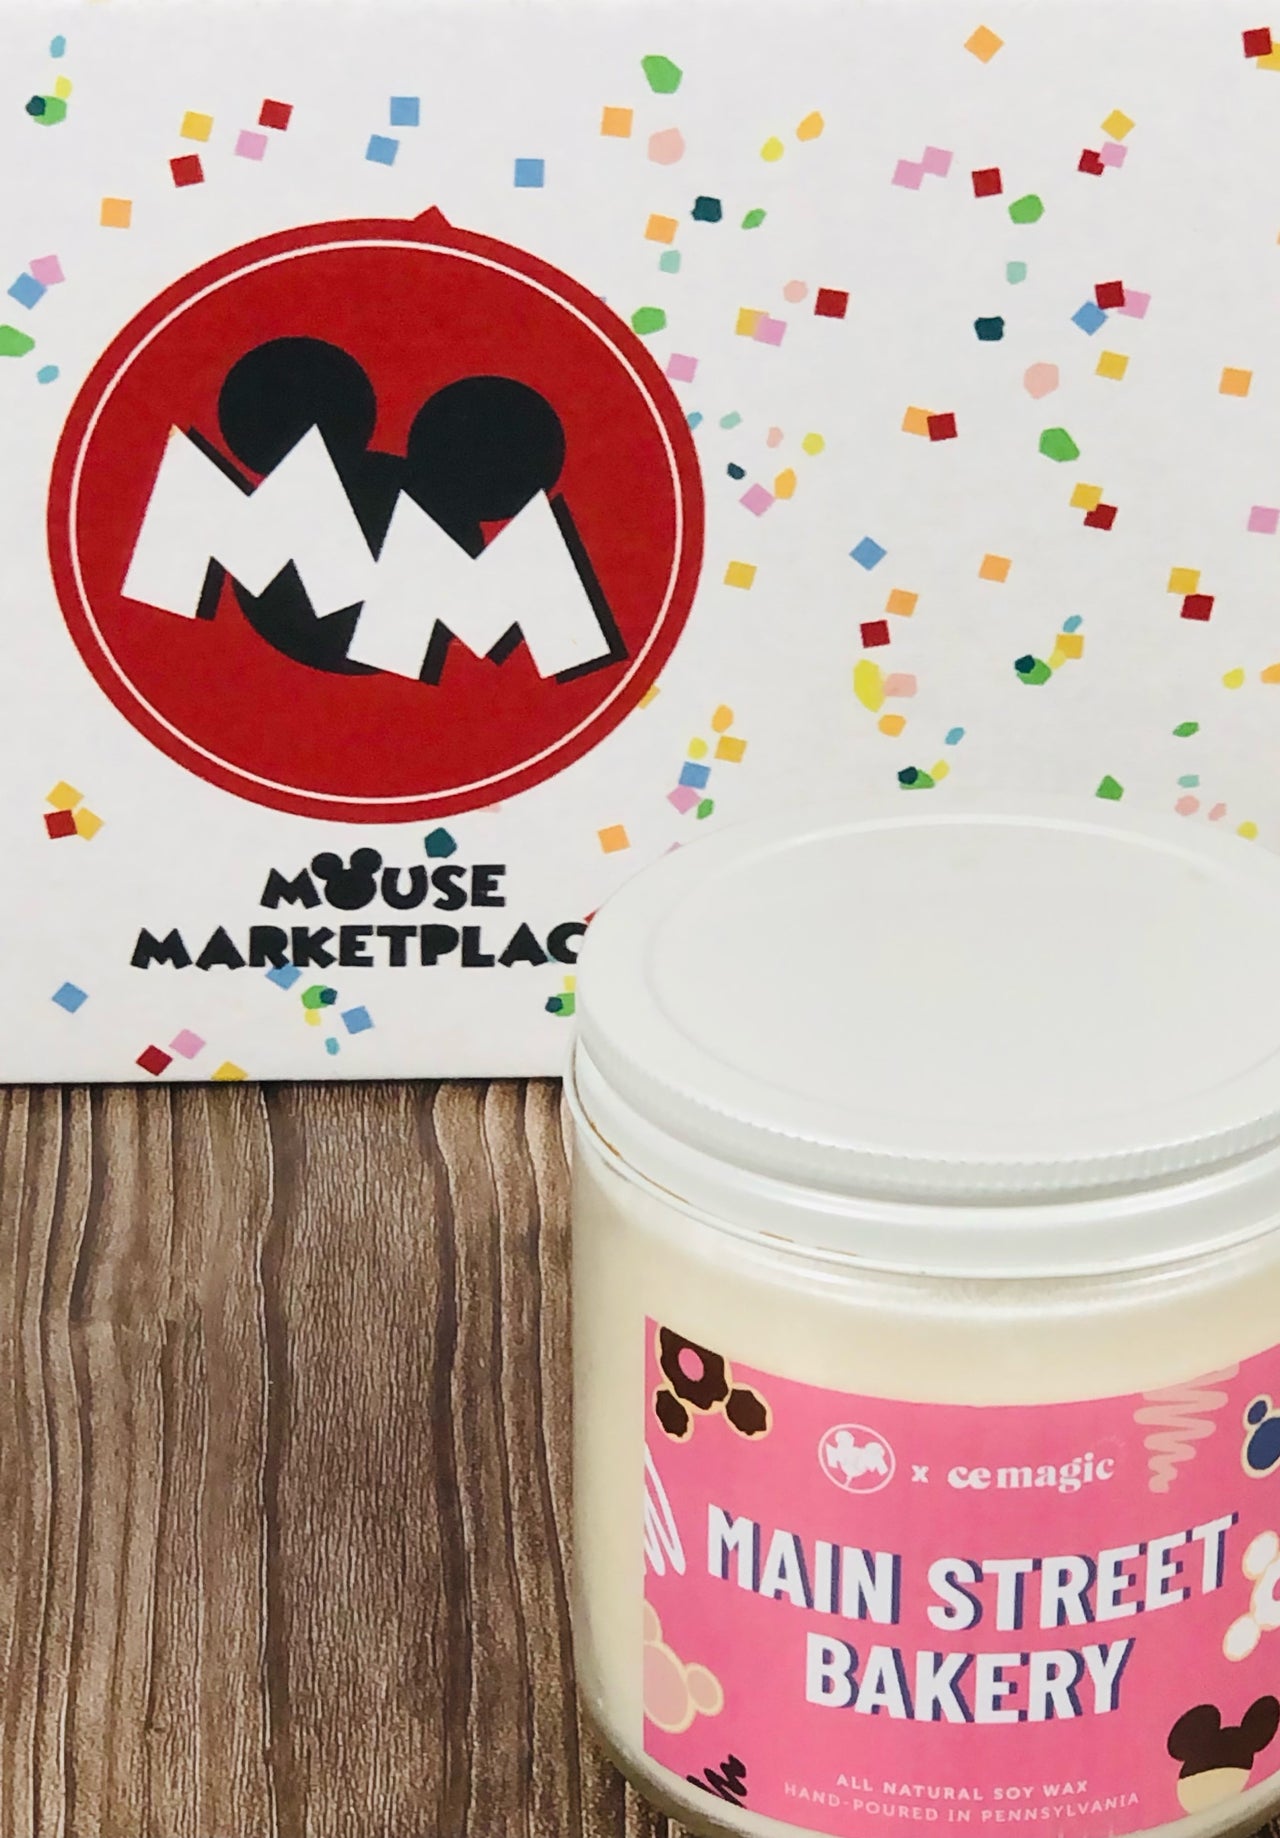 Main Street Bakery Candle 16 oz Sugar Cookie Scented